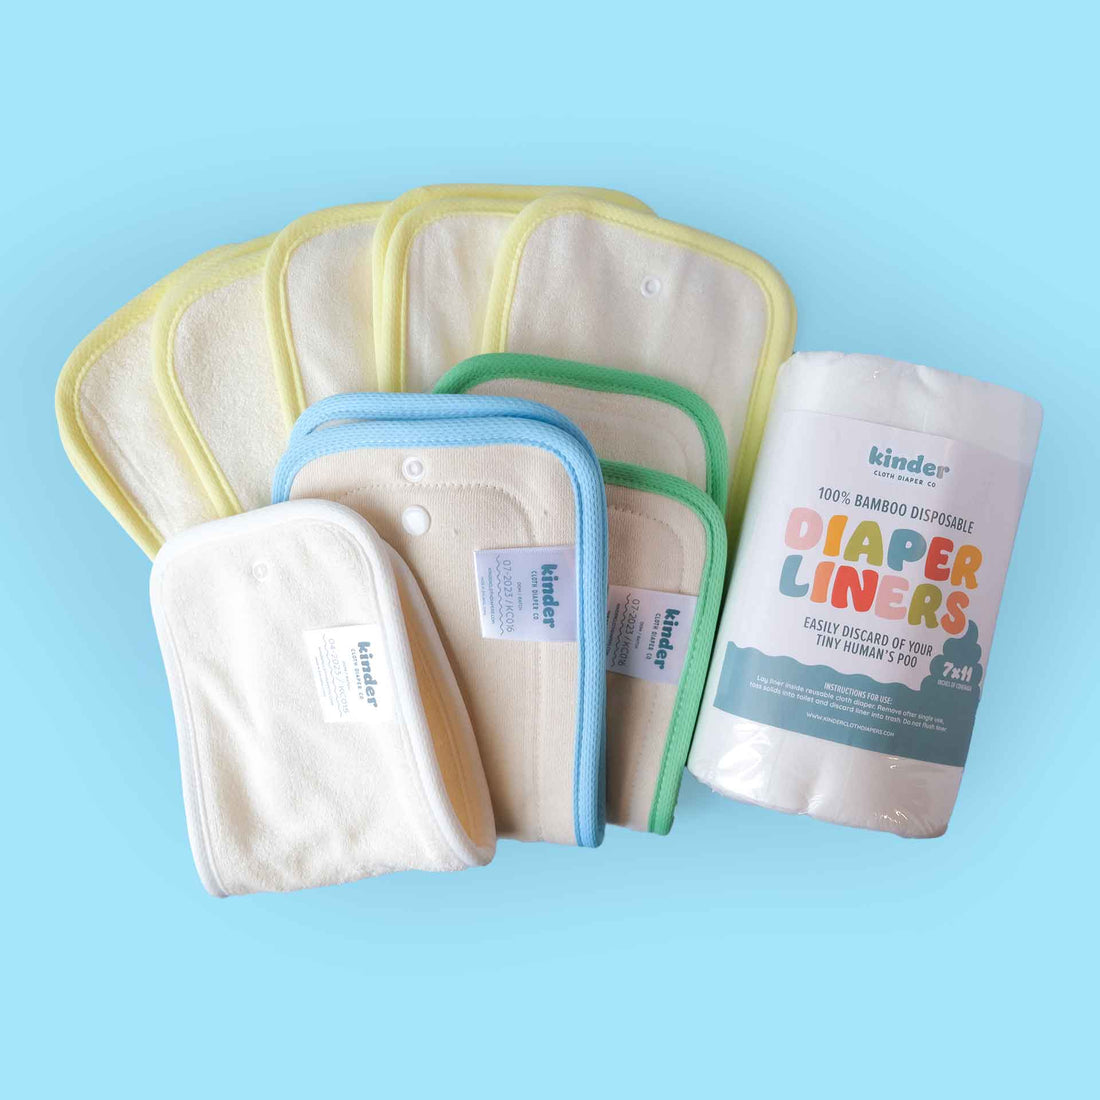 New Parent Starter Bundle: Set of 5 Pocket Cloth Diapers with Athletic Wicking Jersey and More